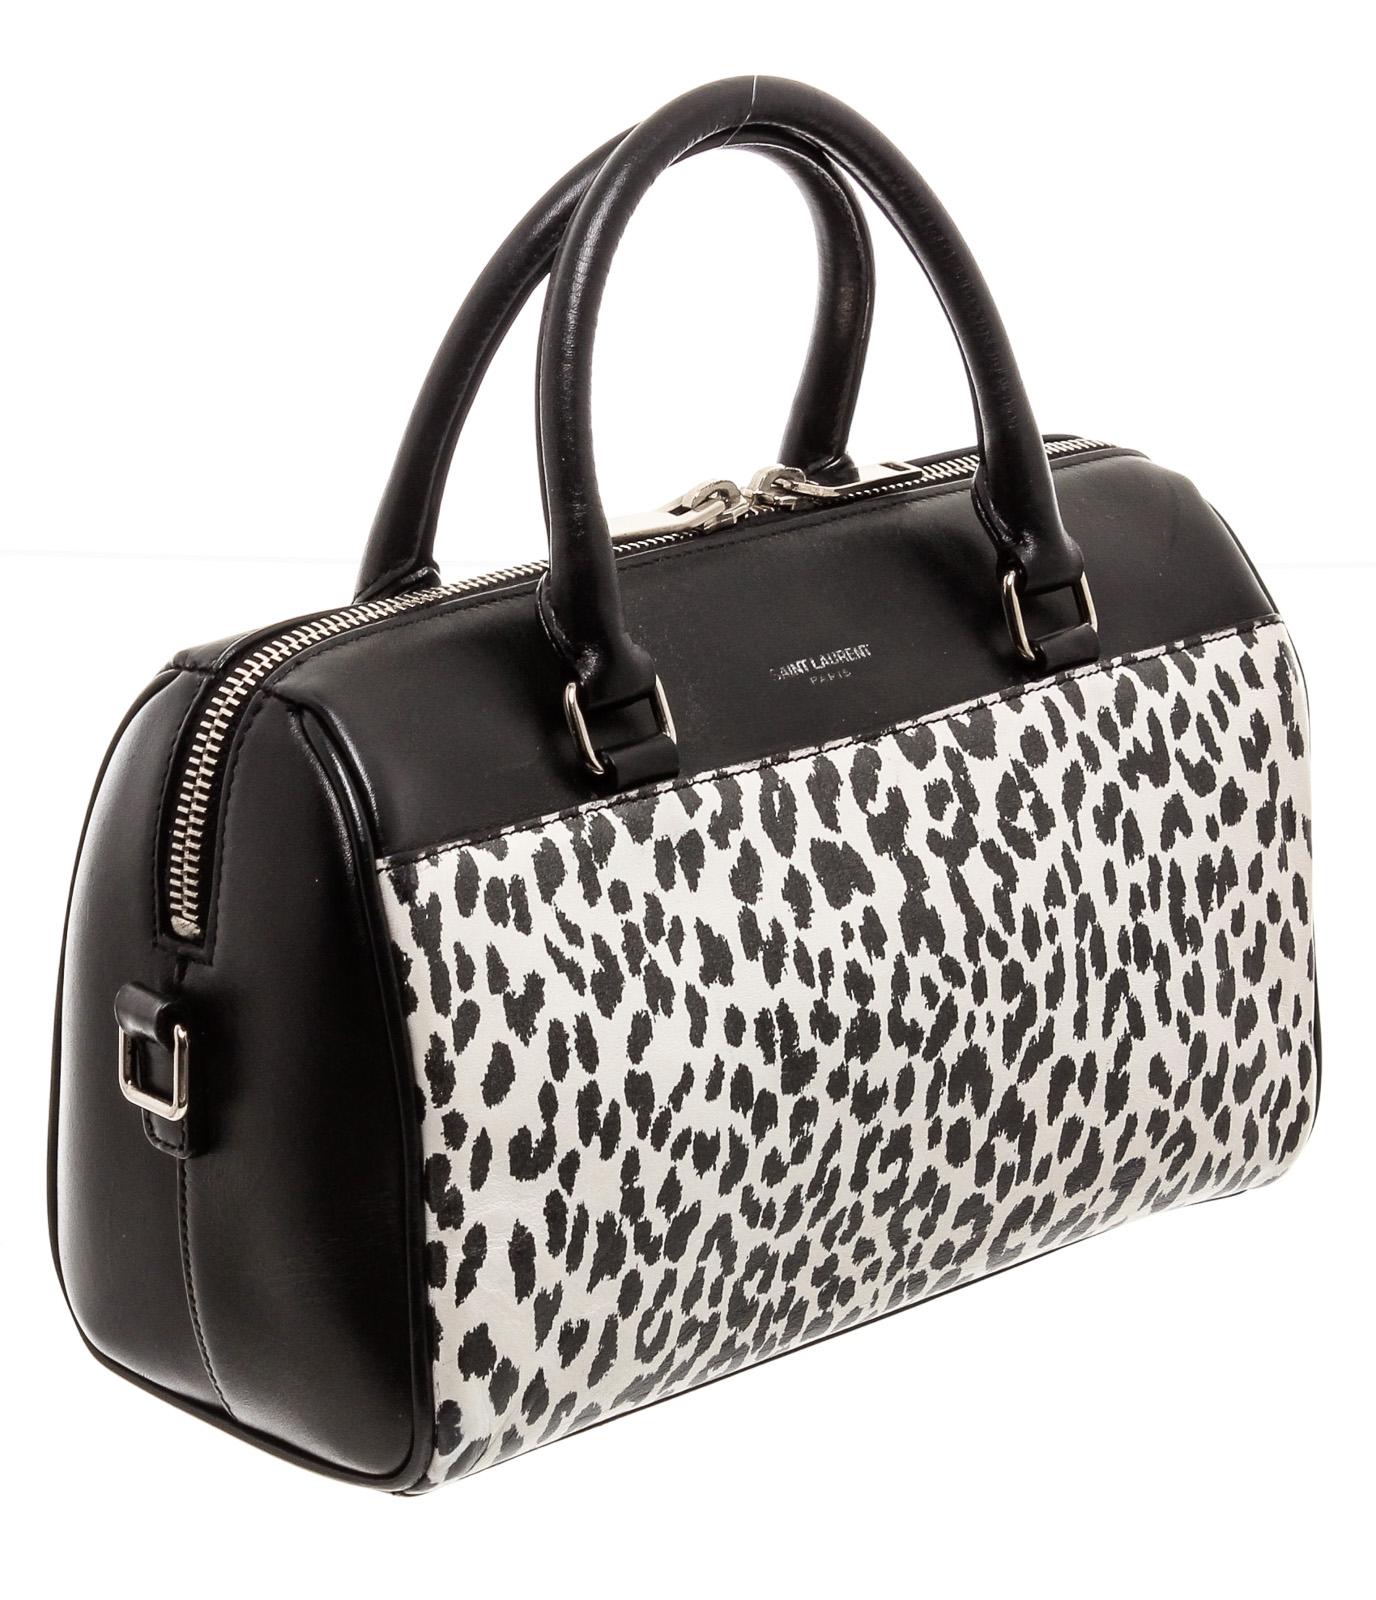 Black and white Cheetah print leather Saint Laurent YSL Classic Baby Duffle bag with silver-tone hardware, dual rolled top handles, foil-stamped logo at front, protective feet at base, tonal suede interior lining and zip closure at top. Detachable